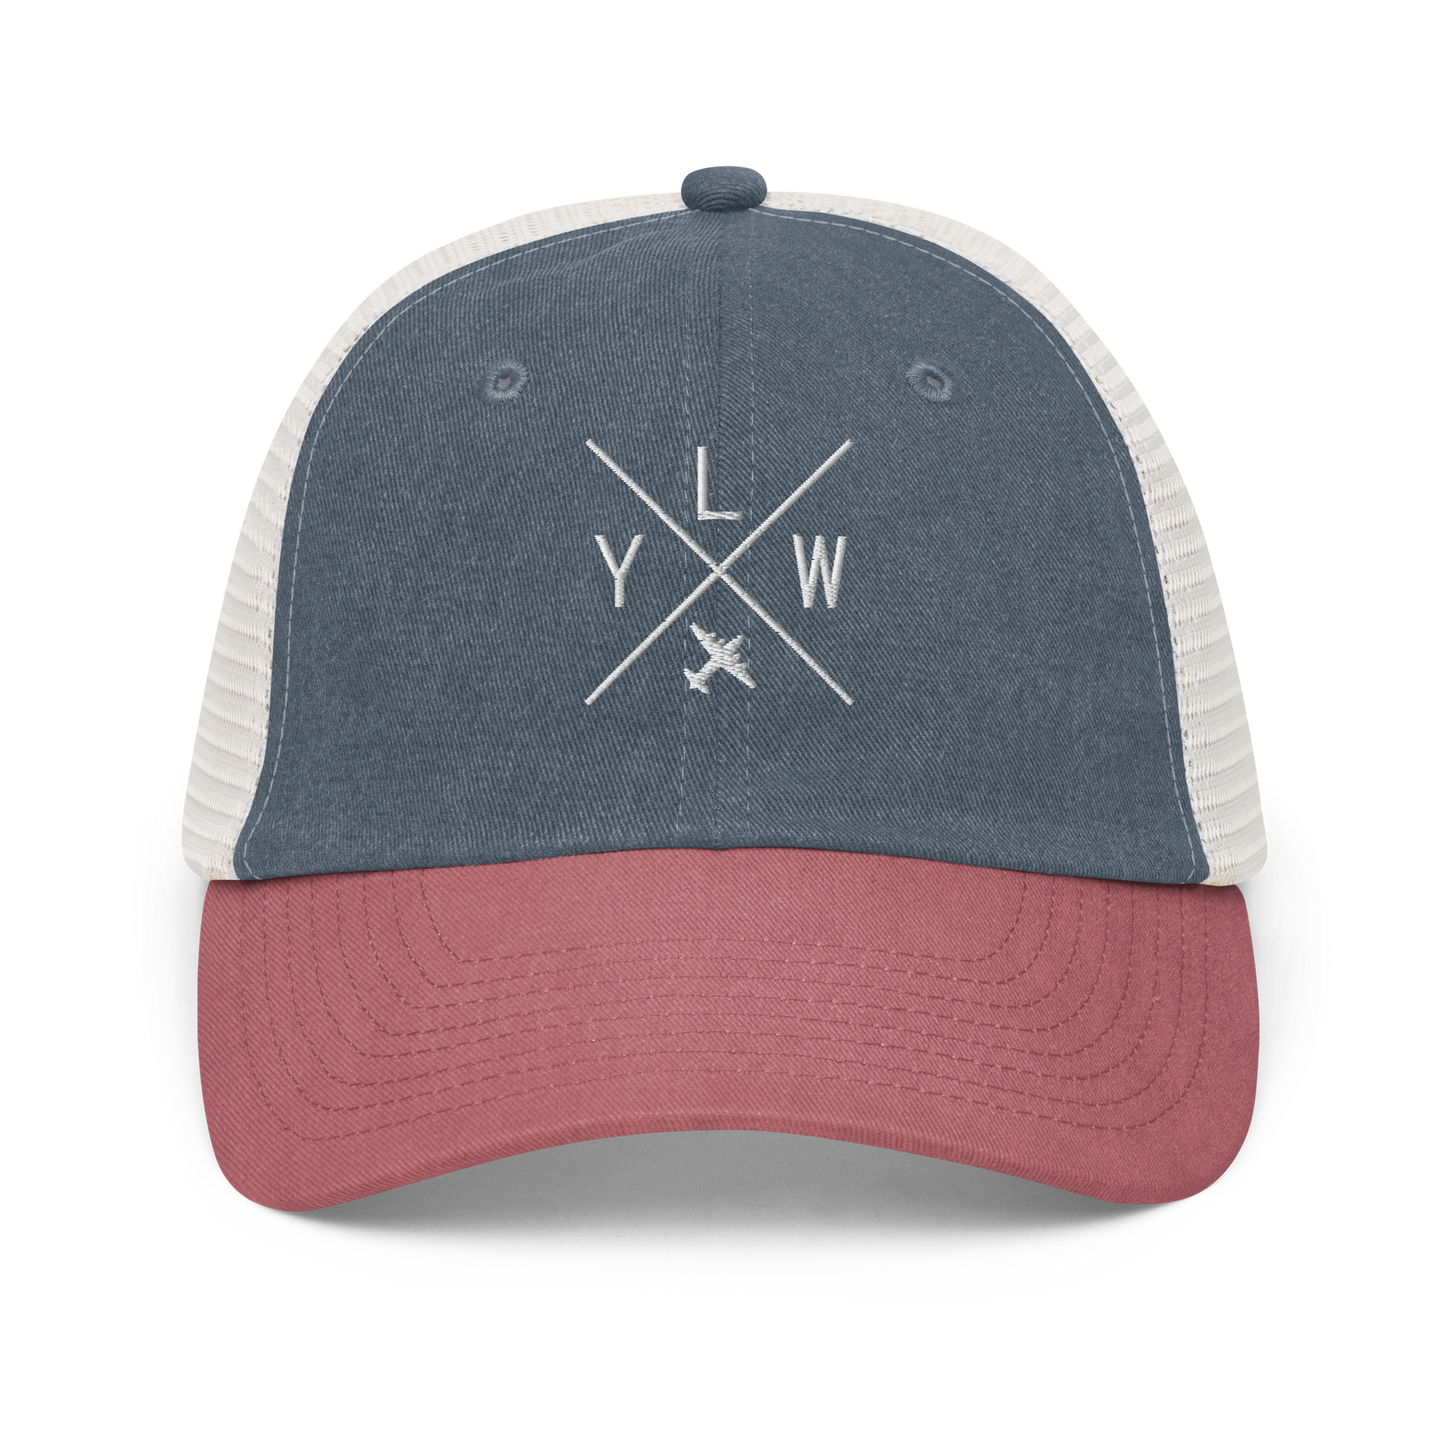 YHM Designs - YLW Kelowna Pigment-Dyed Trucker Cap - Crossed-X Design with Airport Code and Vintage Propliner - White Embroidery - Image 12